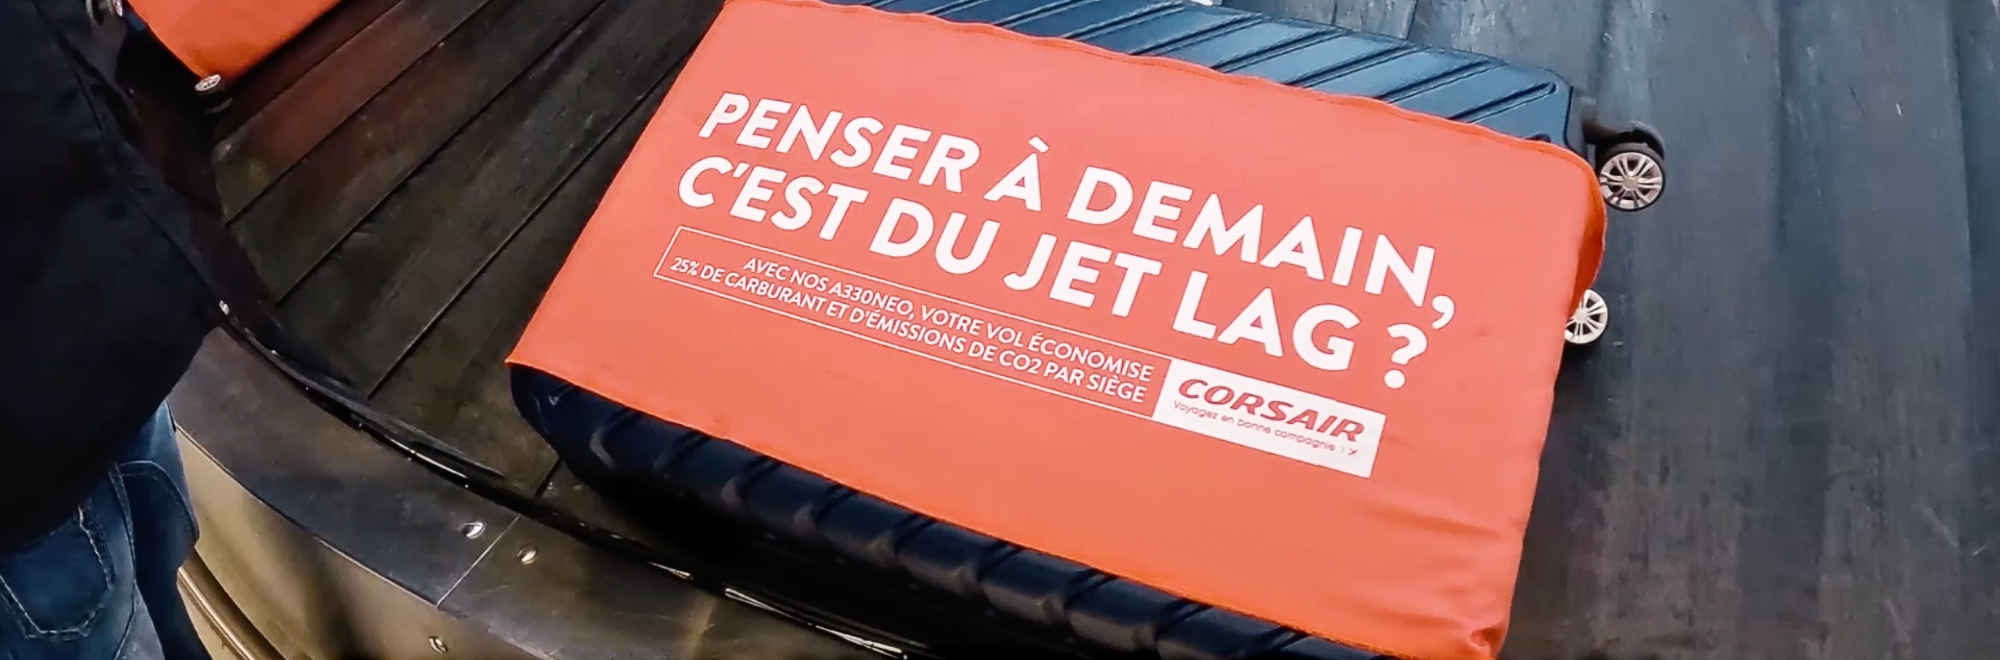 Corsair airline advertises on its competitors’ luggage carousels